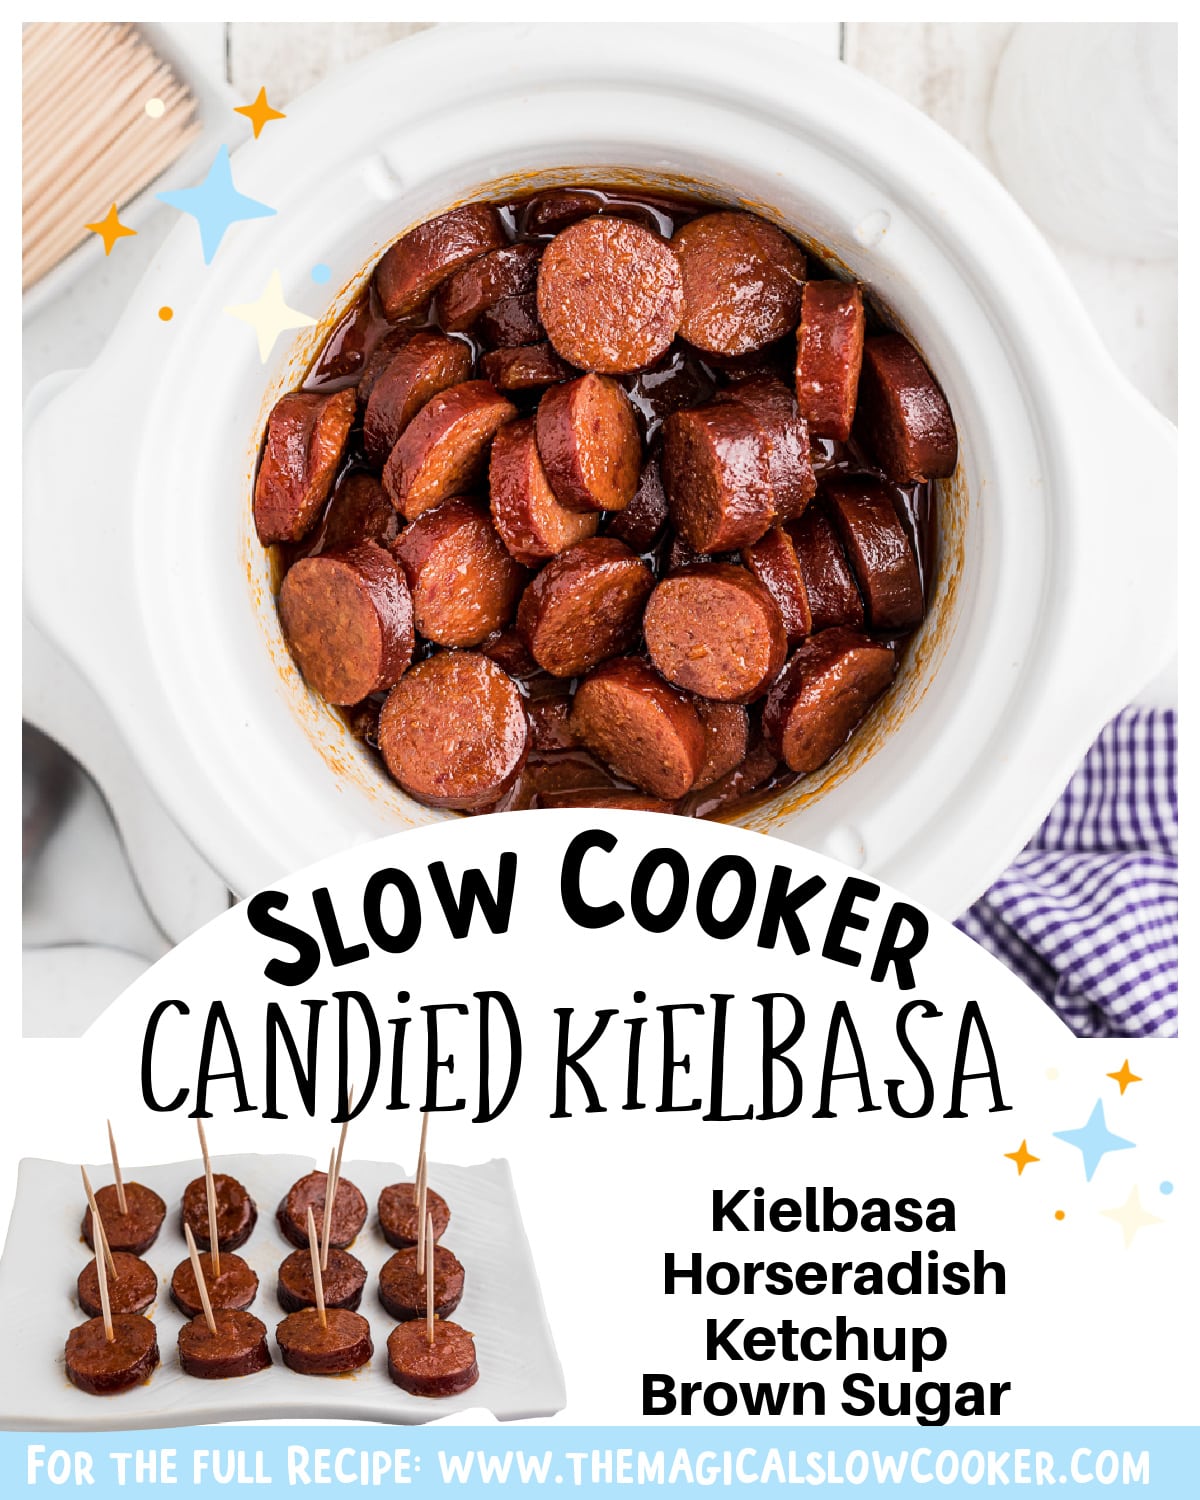 2 images of candied kielbasa with text of what ingredients are.